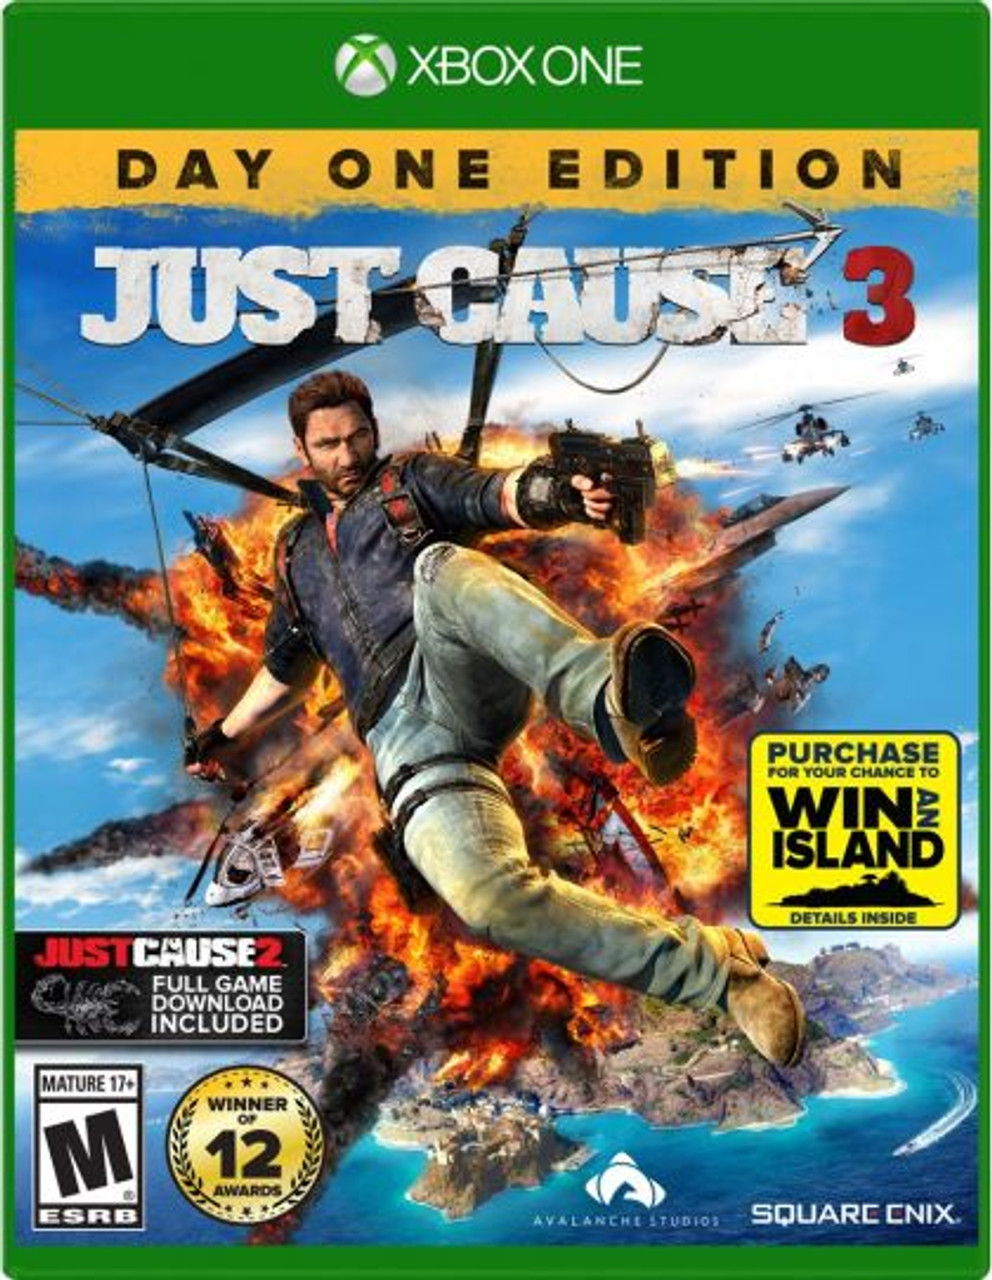 Just Cause 3 - Day One Edition - Xbox One - USED - World-8